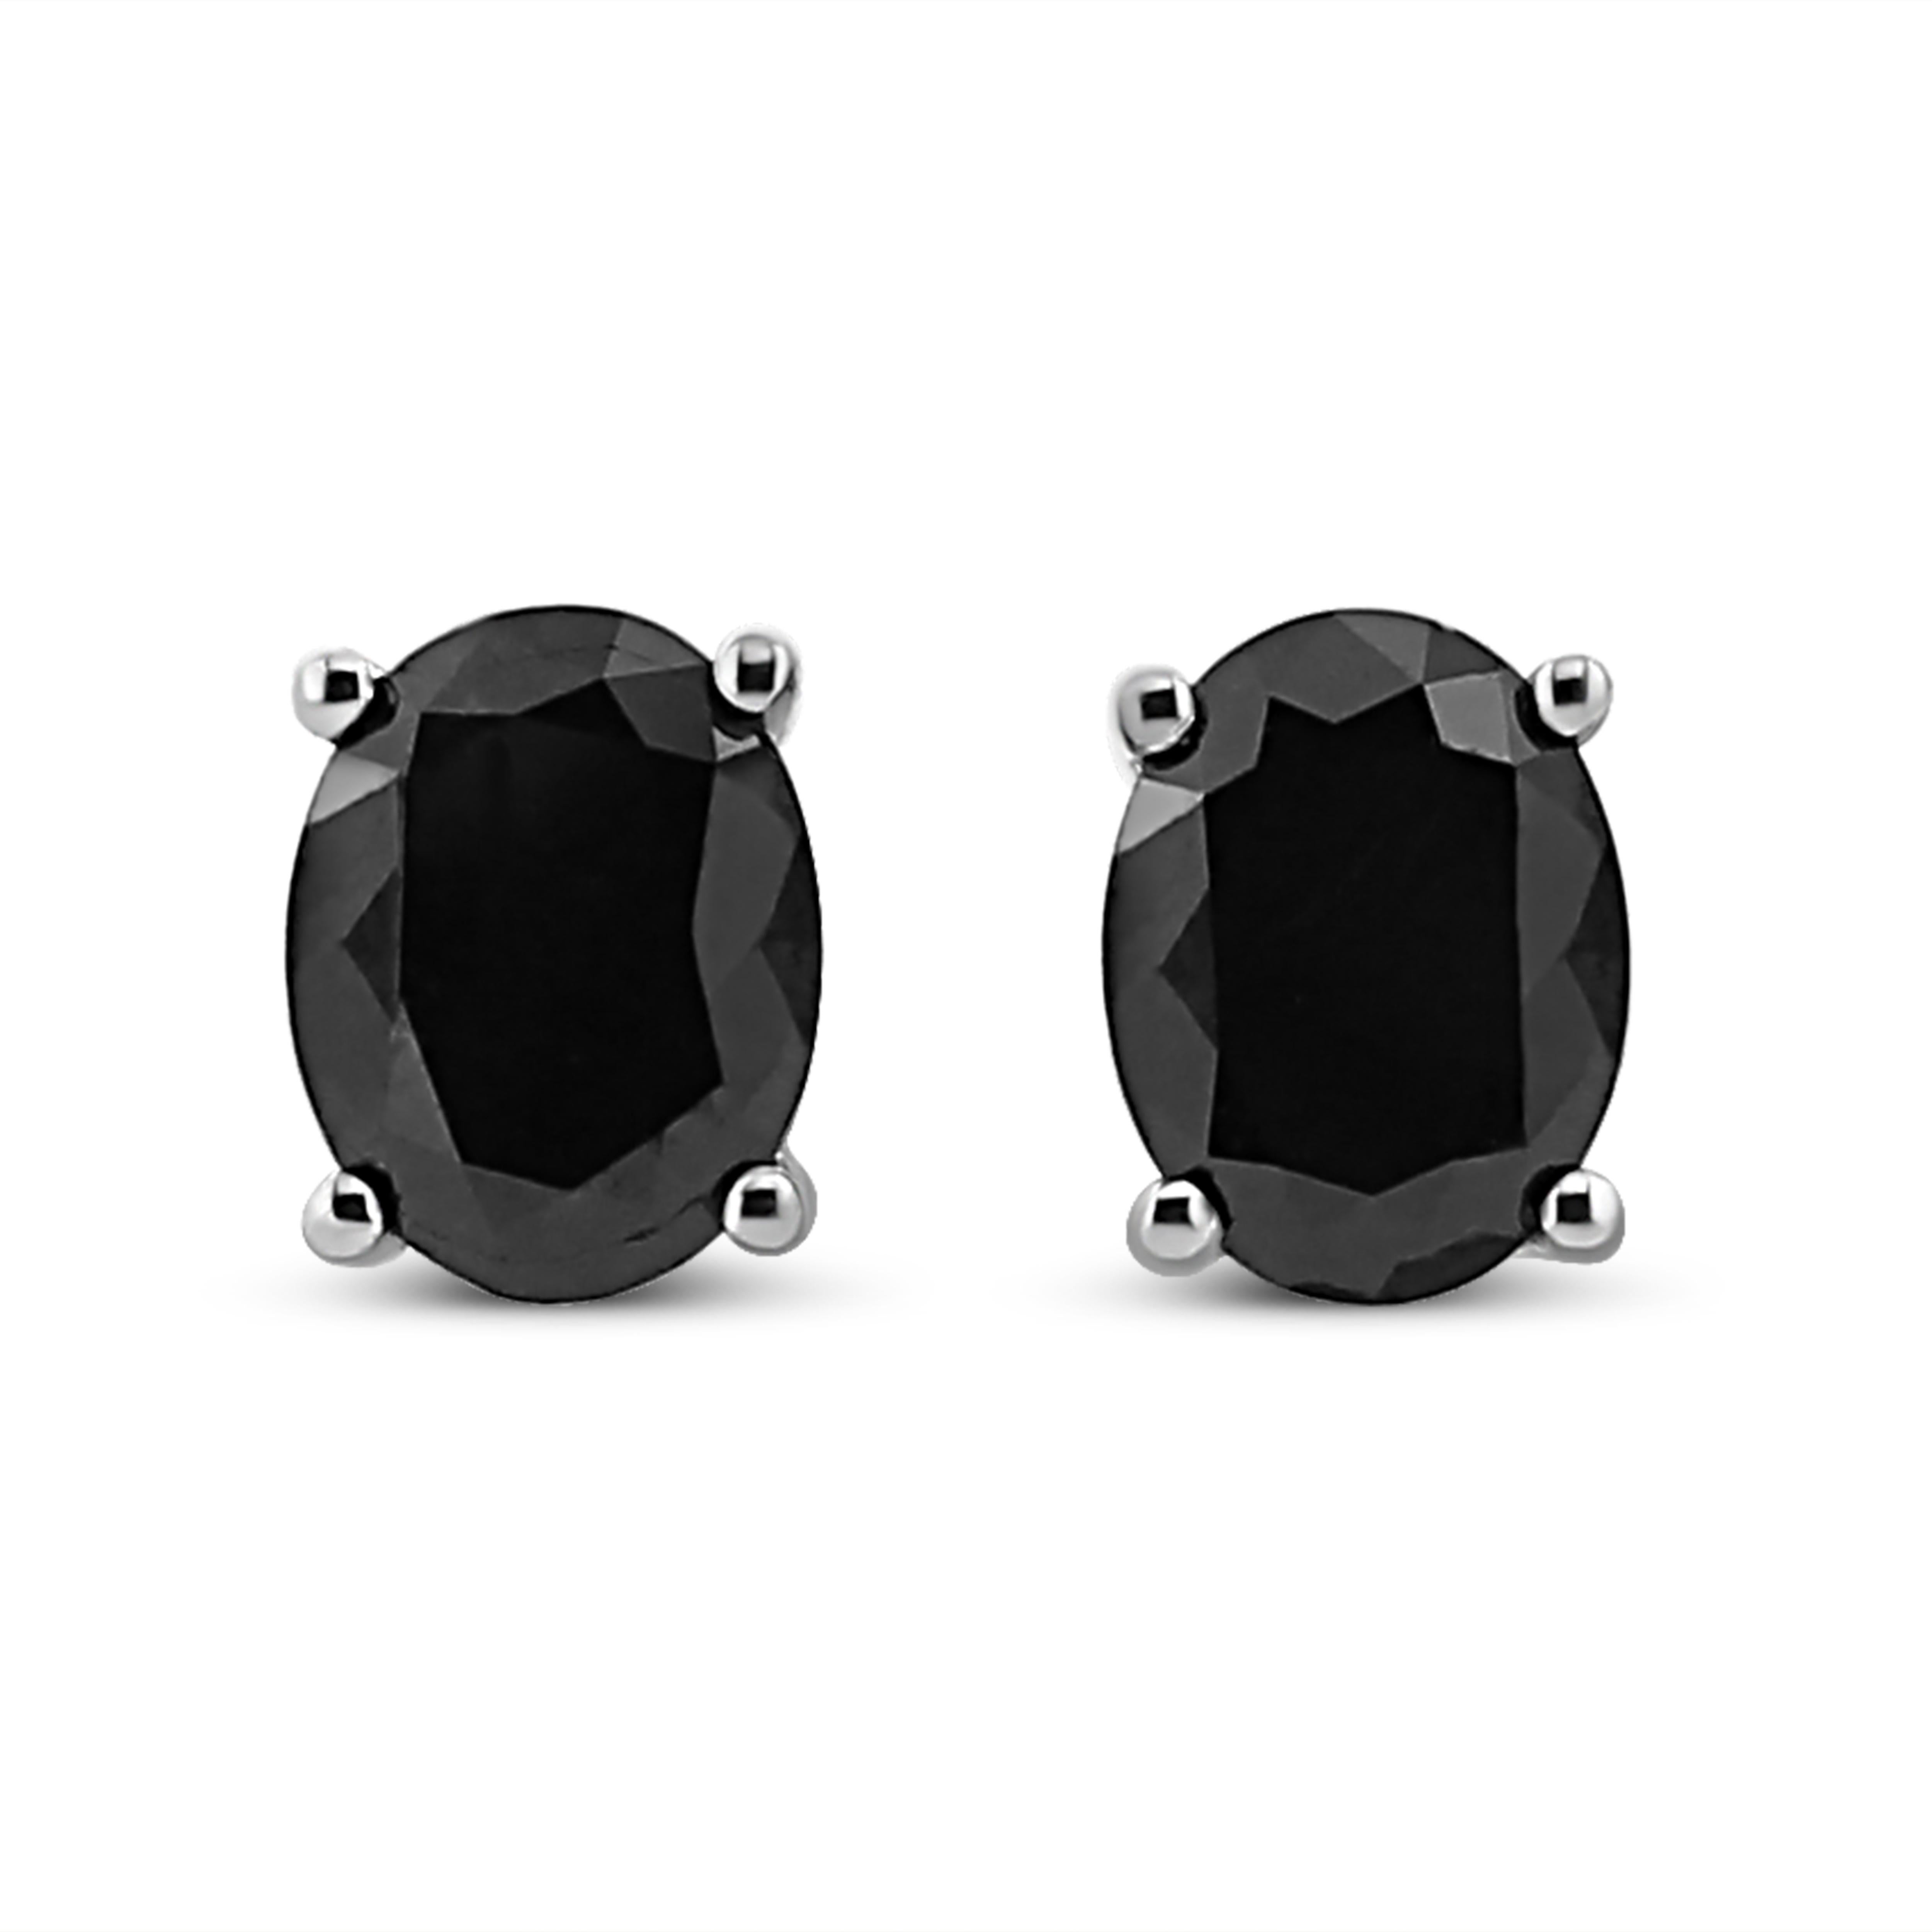 Add this stunningly unique diamond stud earrings to your jewelry collection and impress all your girlfriends. This beautiful pair of treated black studs are made from the finest .925 sterling silver, and is embellished with treated, black oval